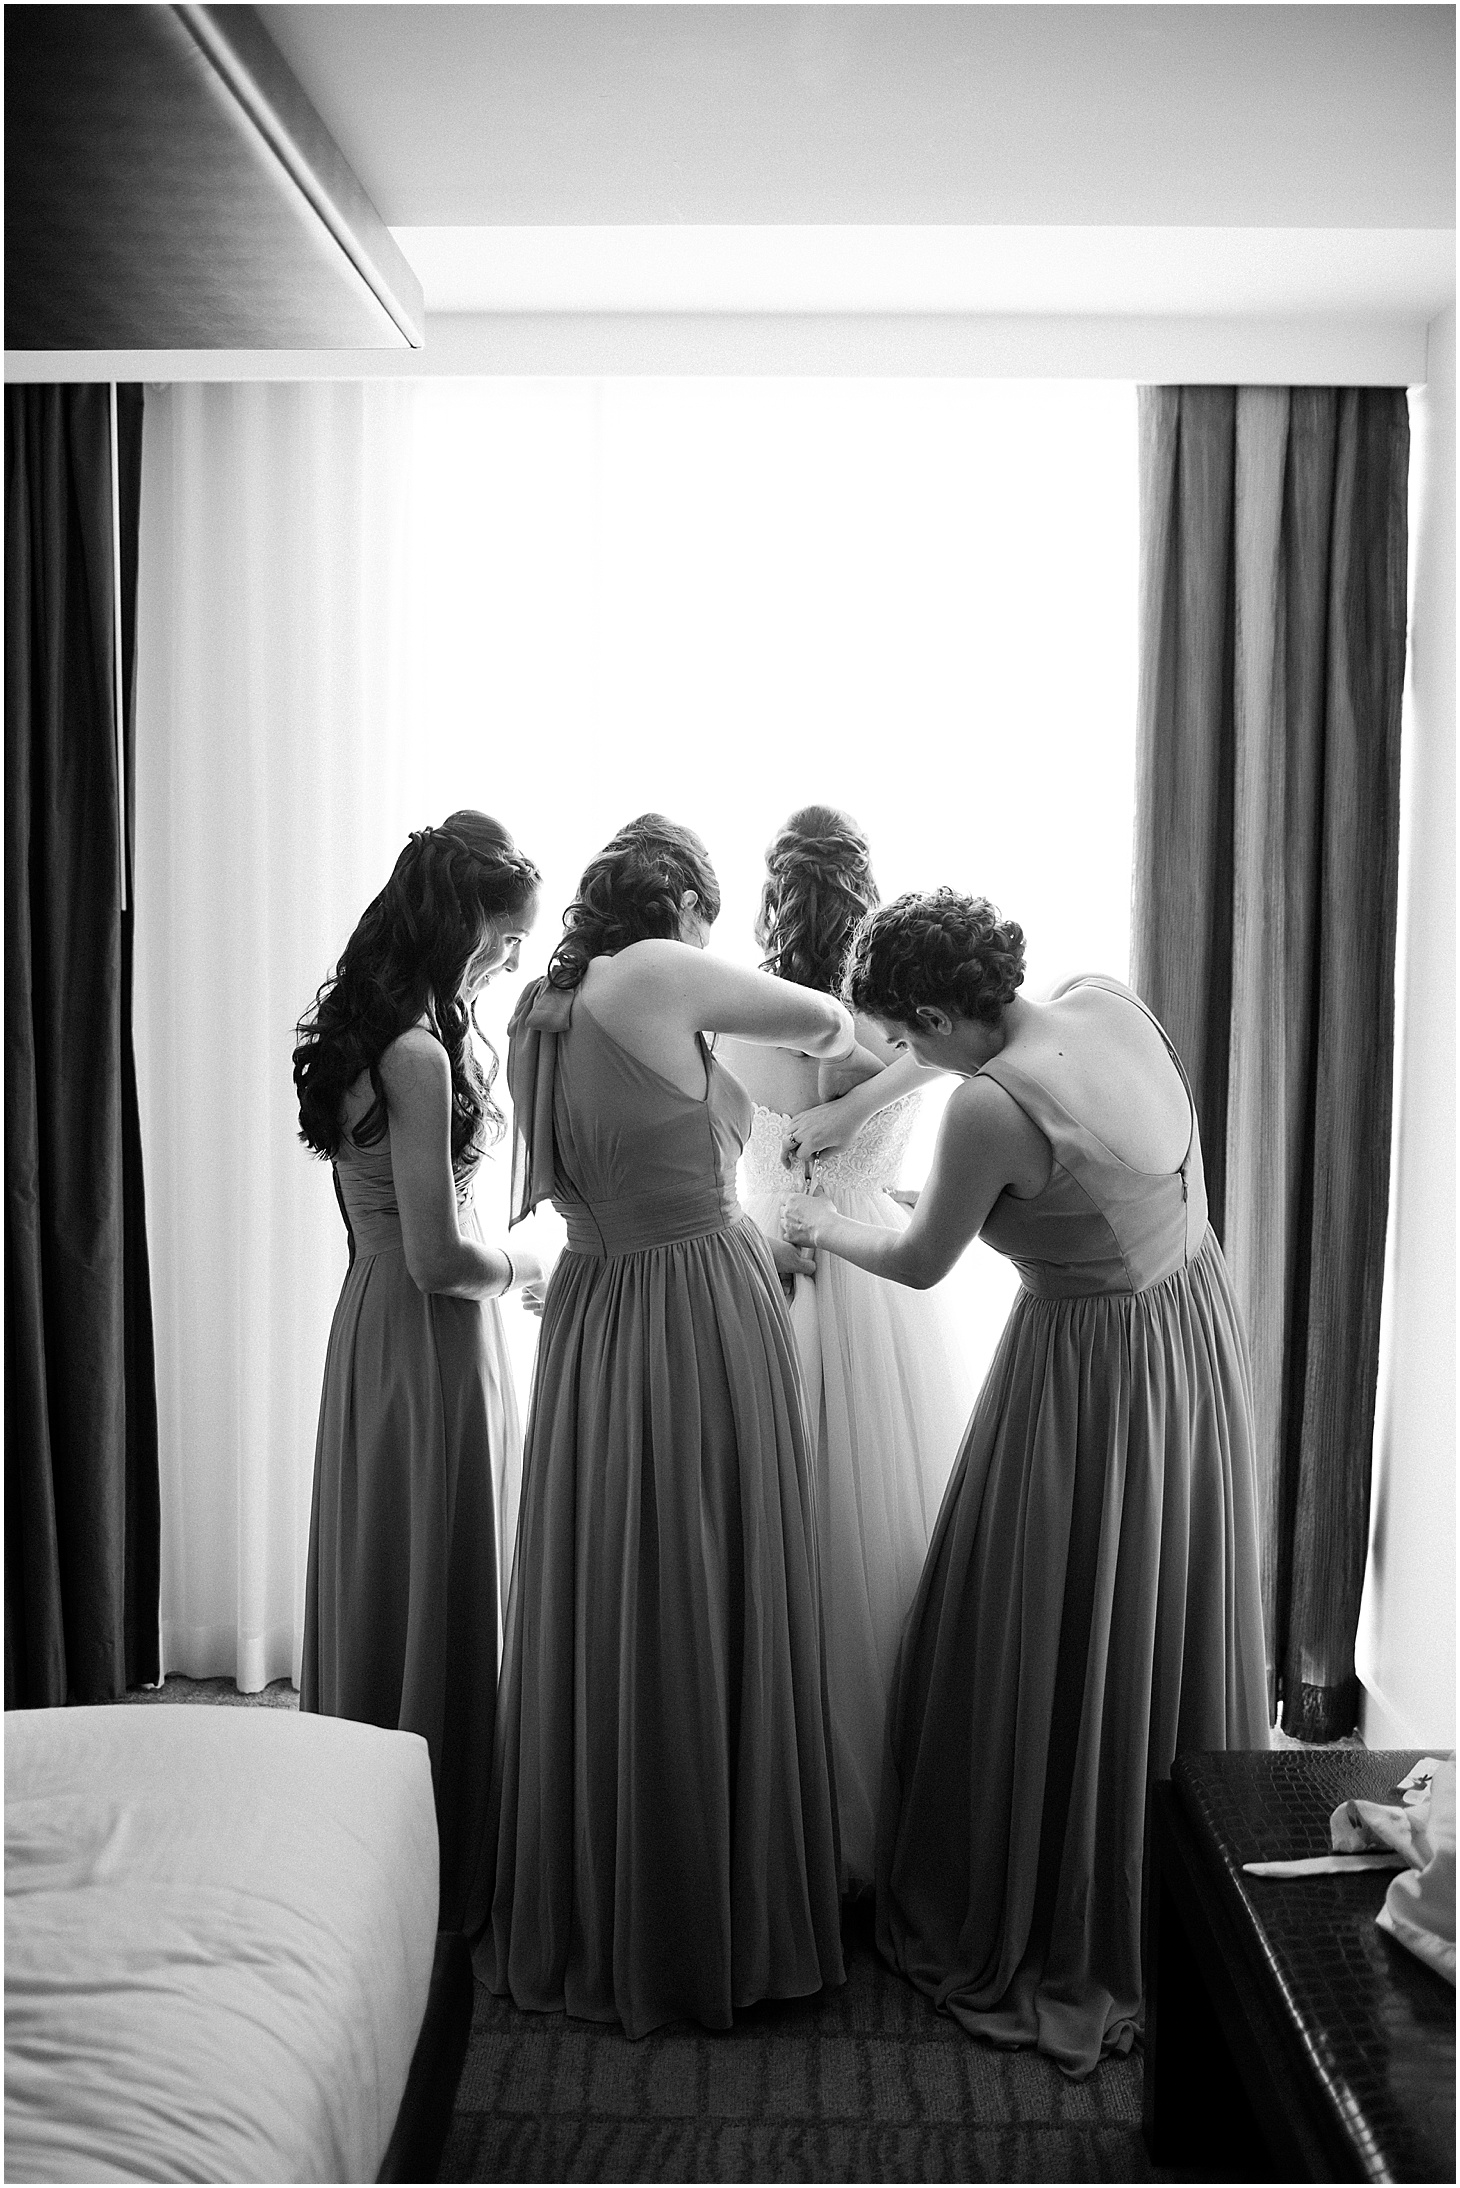 Bridal Party Getting Ready at Kimpton Donovan Hotel, Blue Minted Wedding Suite, Dusty Blue and Pink Jewish Wedding at Women in the Arts, Sarah Bradshaw Photography, DC Wedding Photographer 